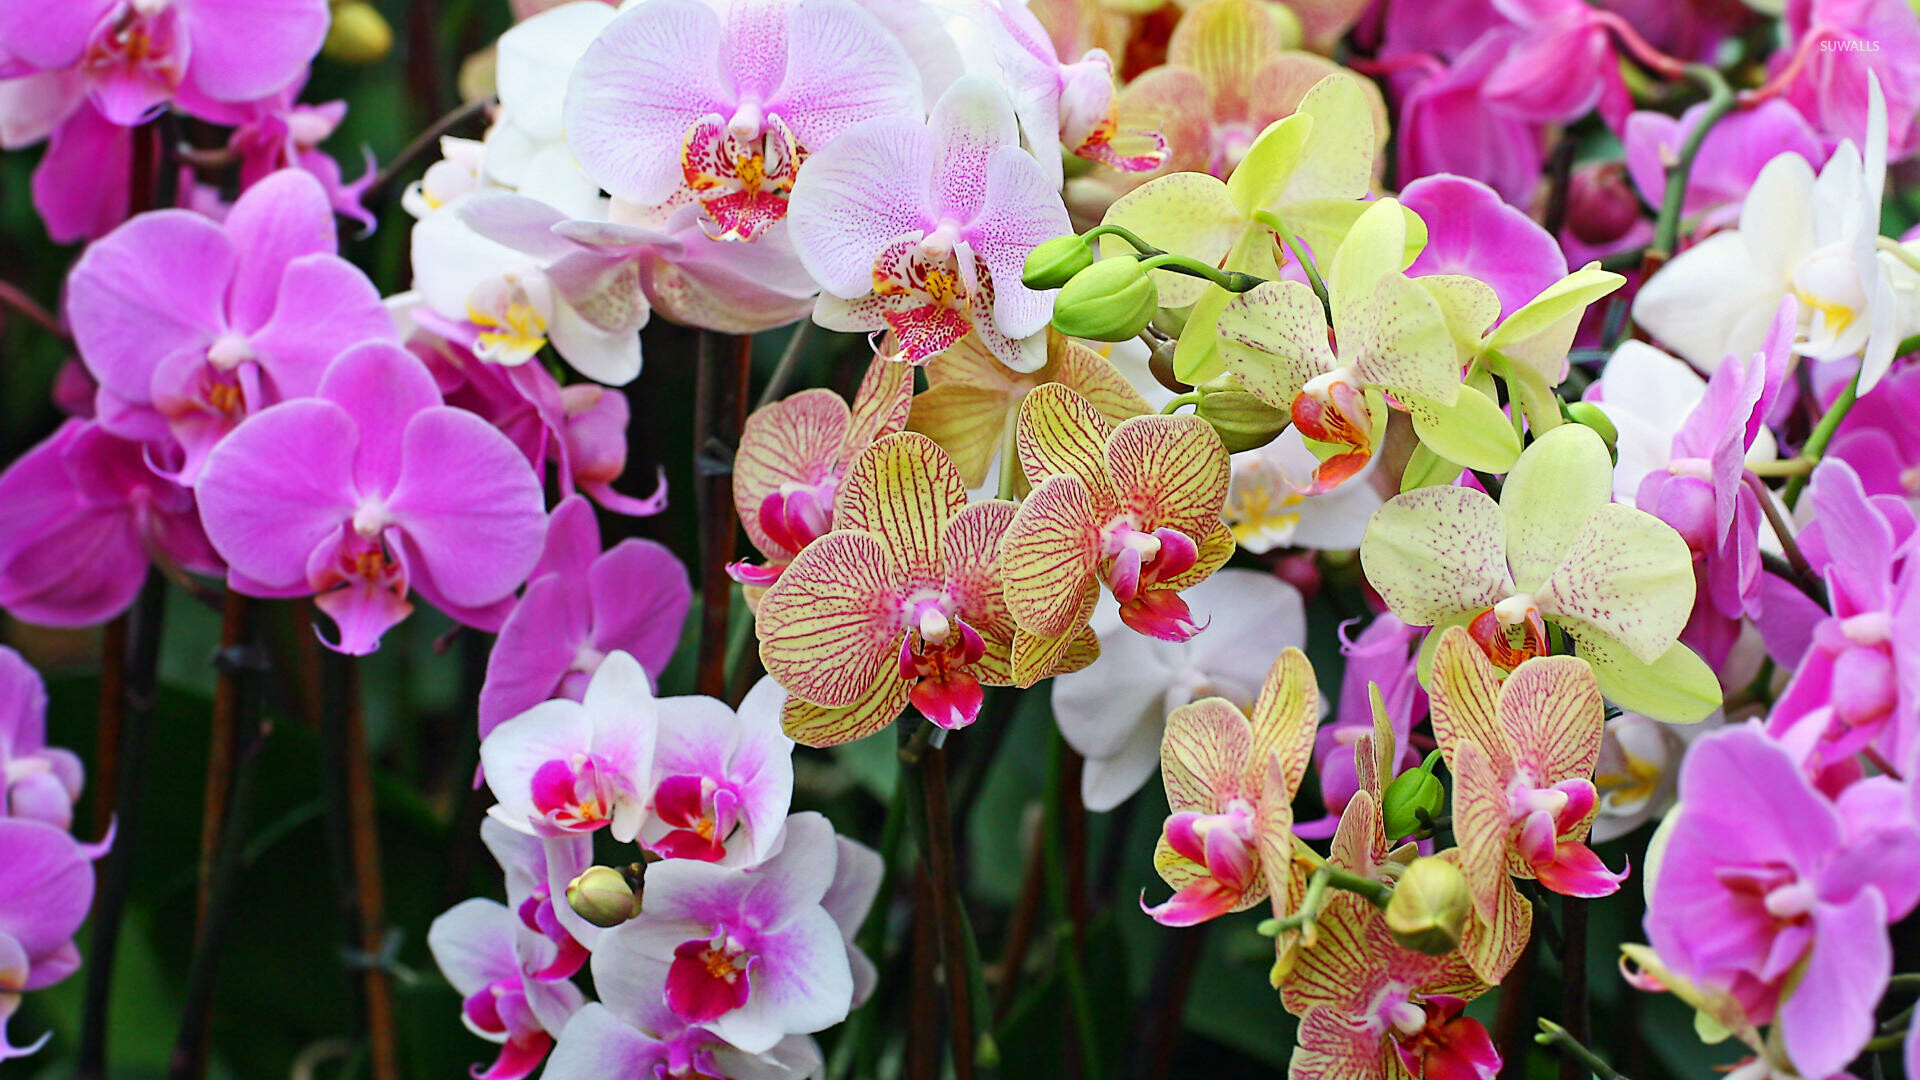 Orchid: Most orchids are tropical plants which live as epiphytes or "air plants" hanging on to trees for support. 1920x1080 Full HD Background.